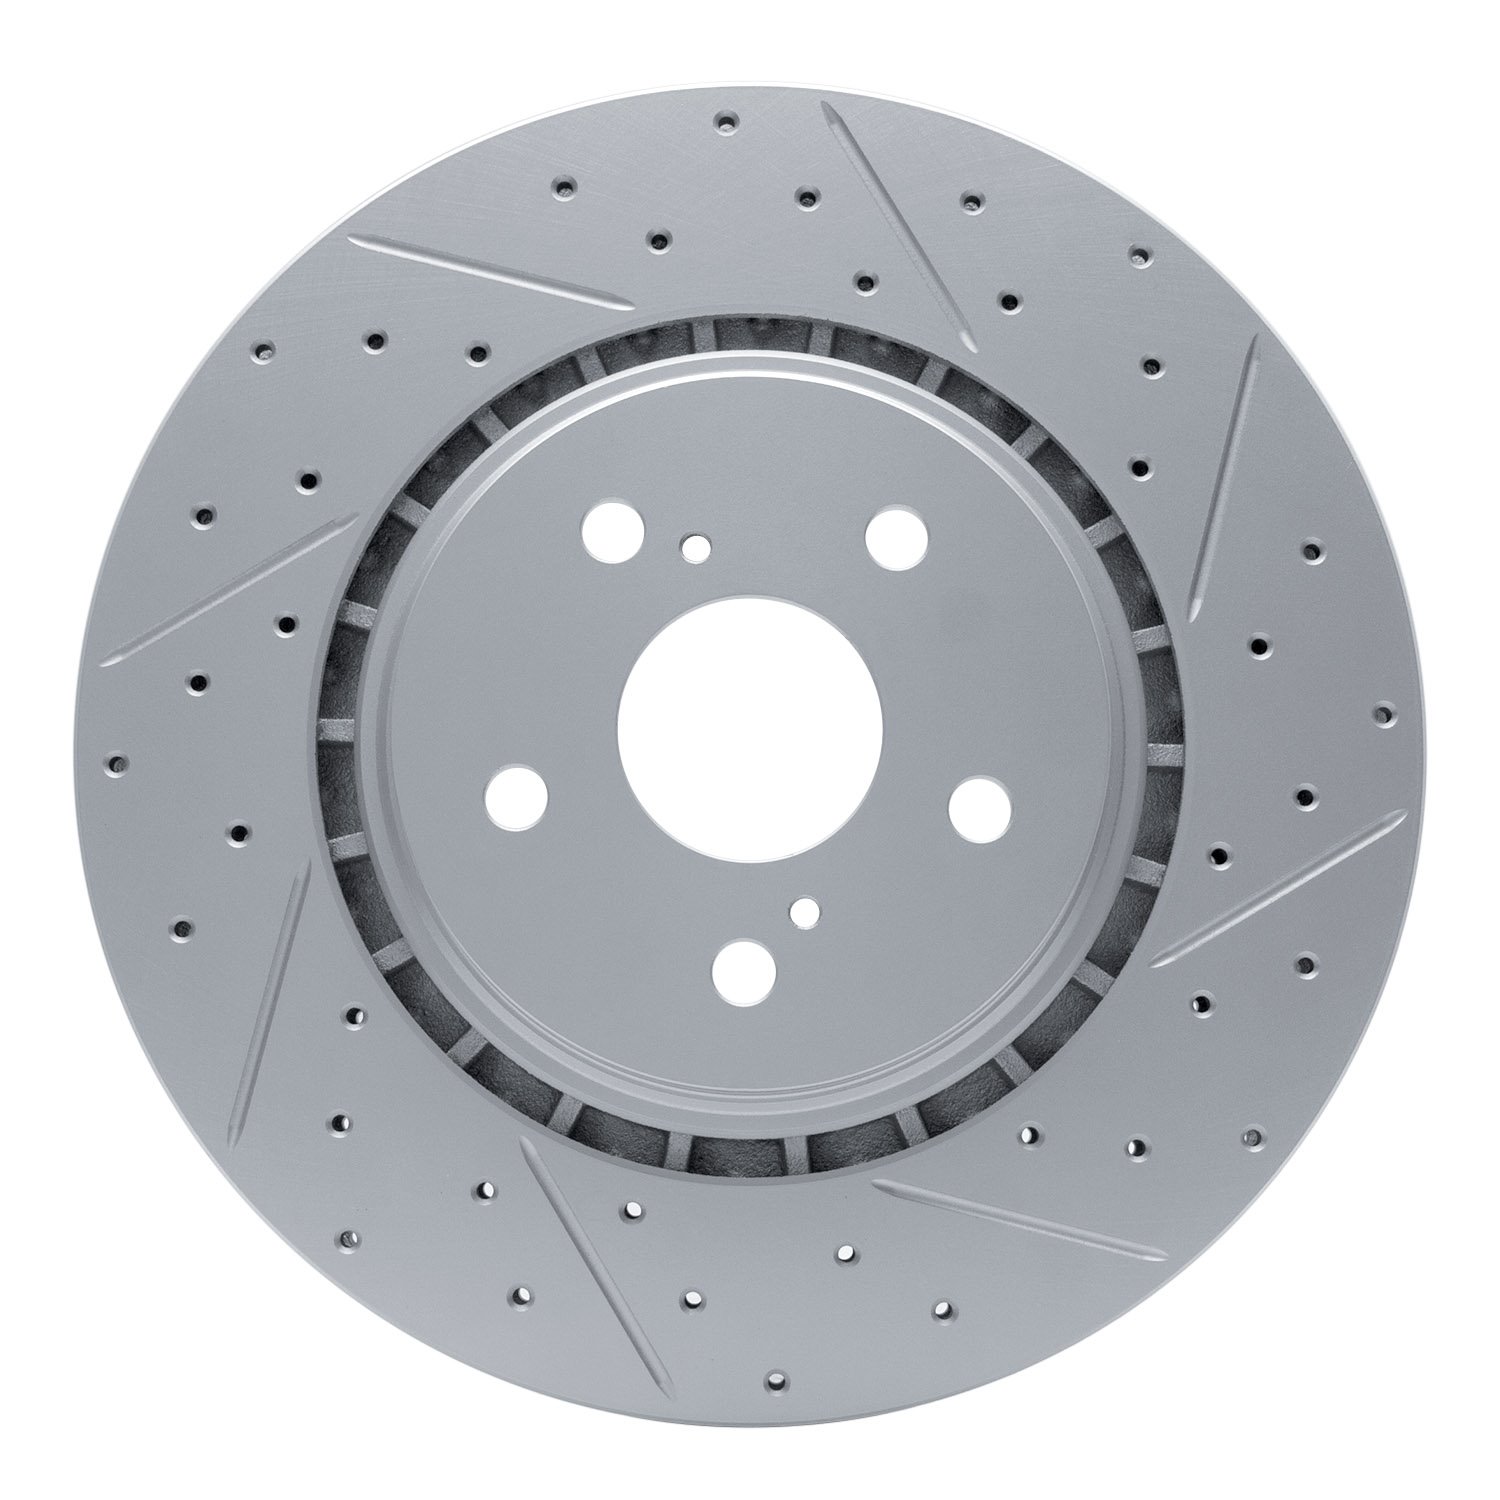 830-75043R Geoperformance Drilled/Slotted Brake Rotor, Fits Select Lexus/Toyota/Scion, Position: Front Right